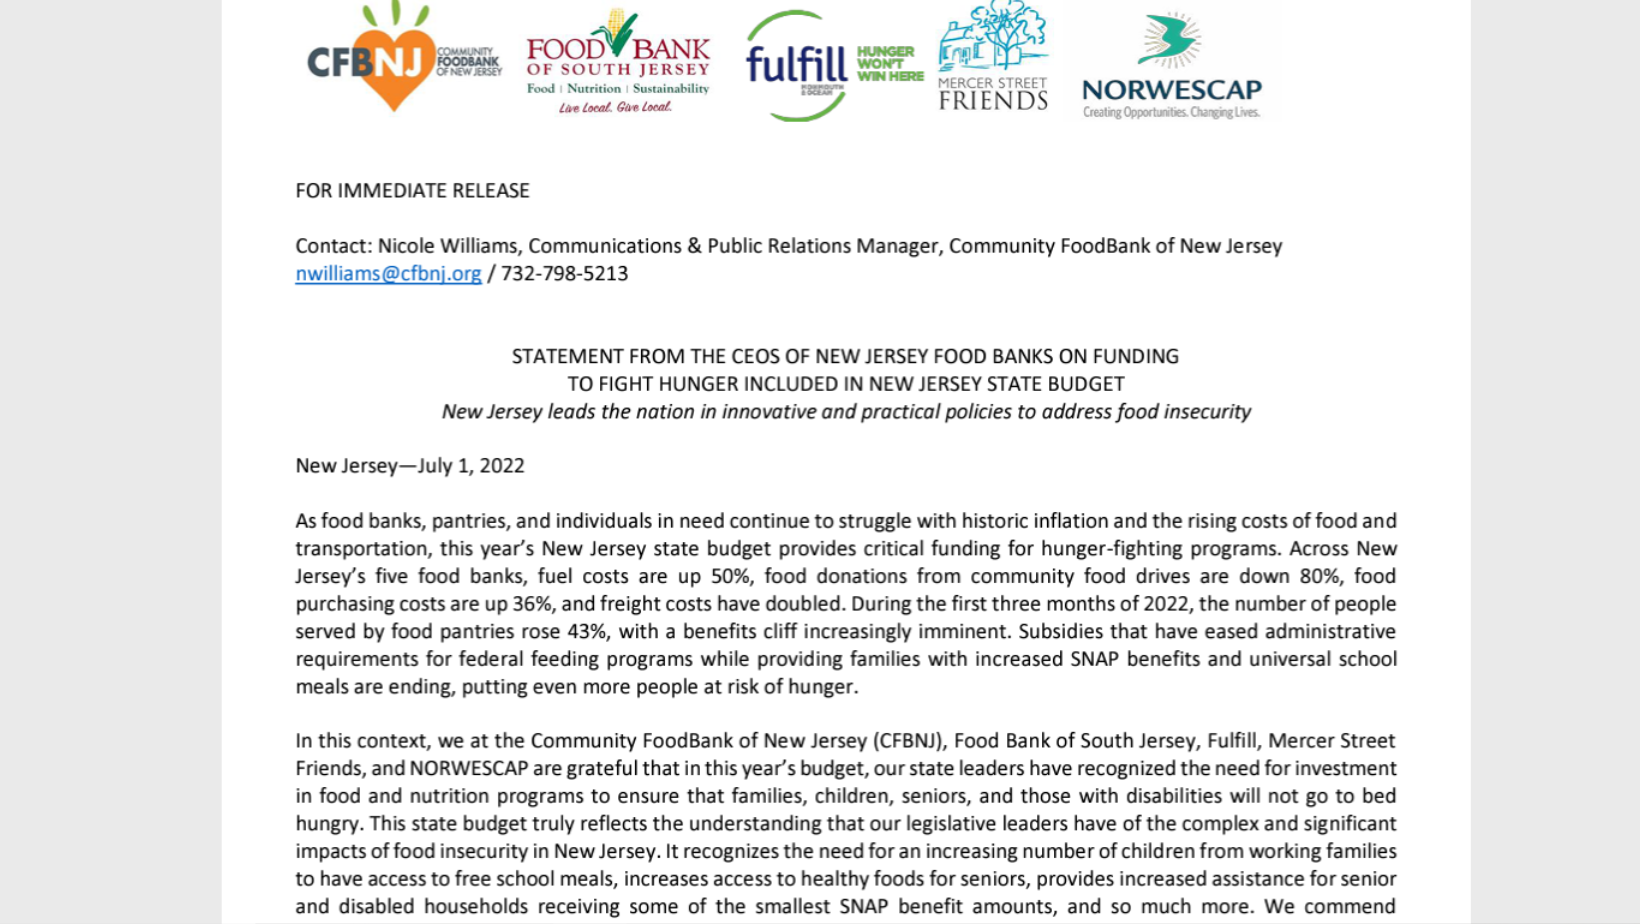 A Statement from the CEOs of NJ Food Banks on Funding to Fight Hunger in  2022 State Budget - The Food Bank of South Jersey